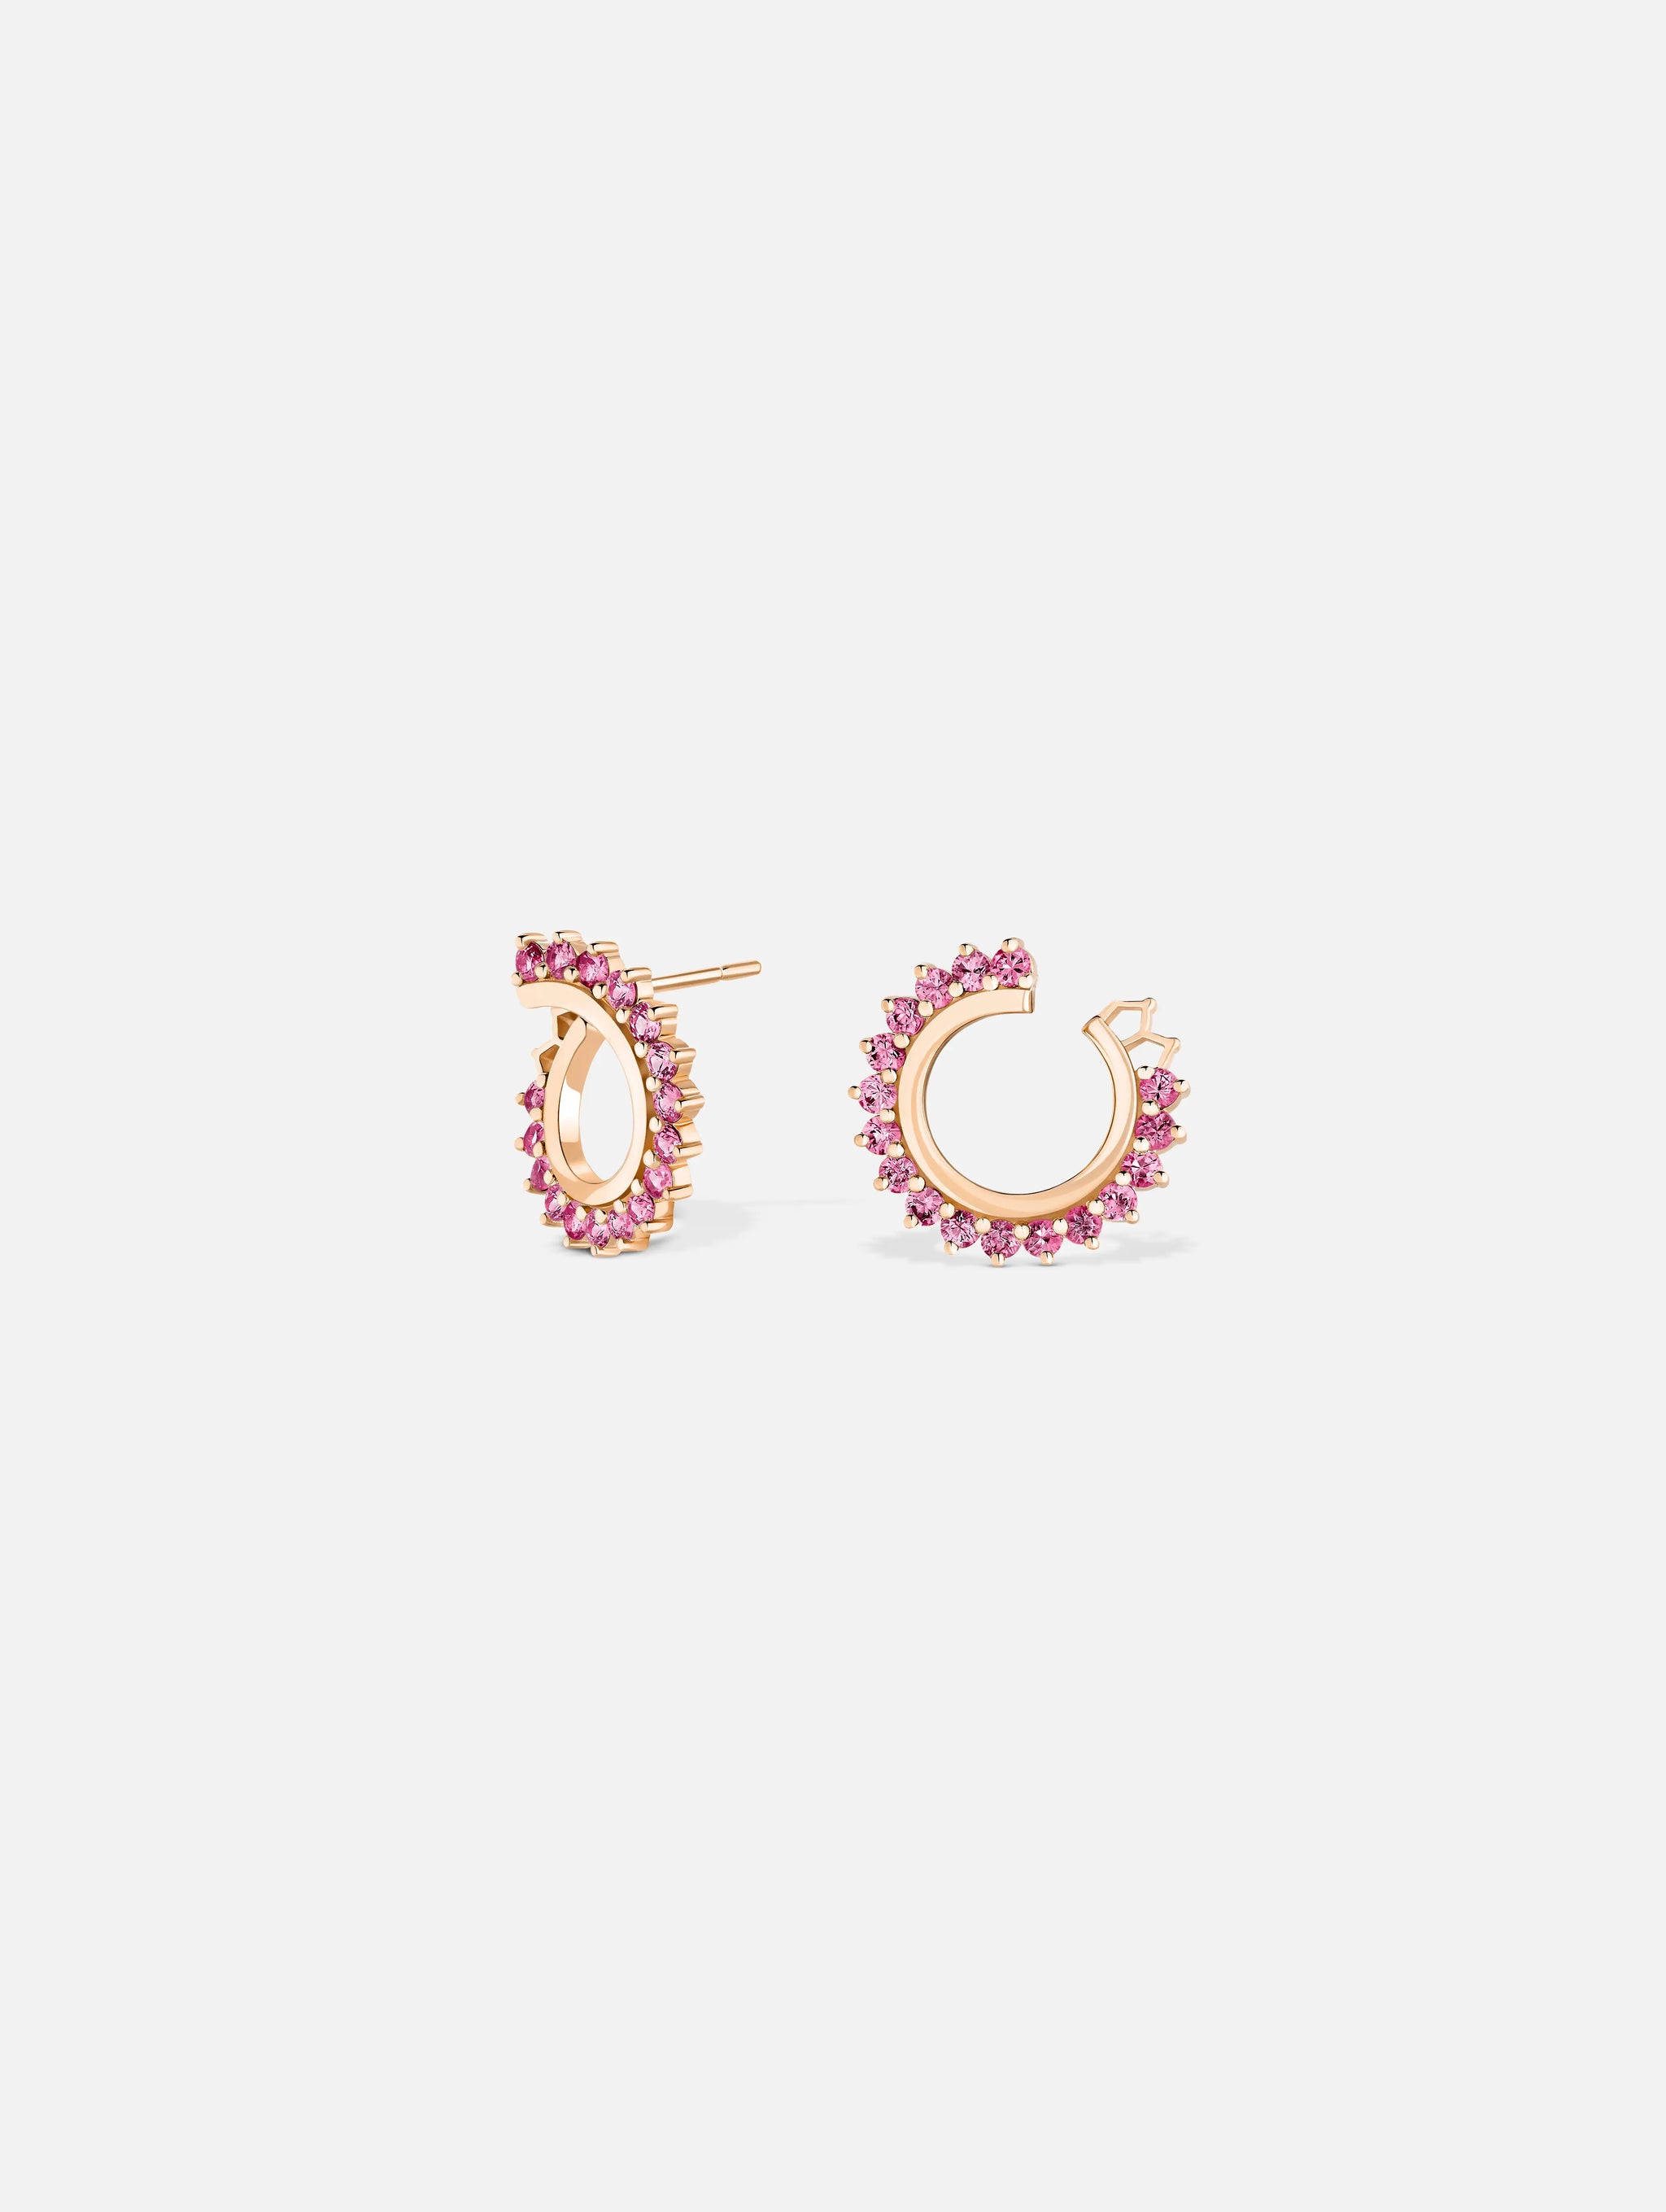 Pink Sapphire Earrings in Rose Gold - 1 - Nouvel Heritage